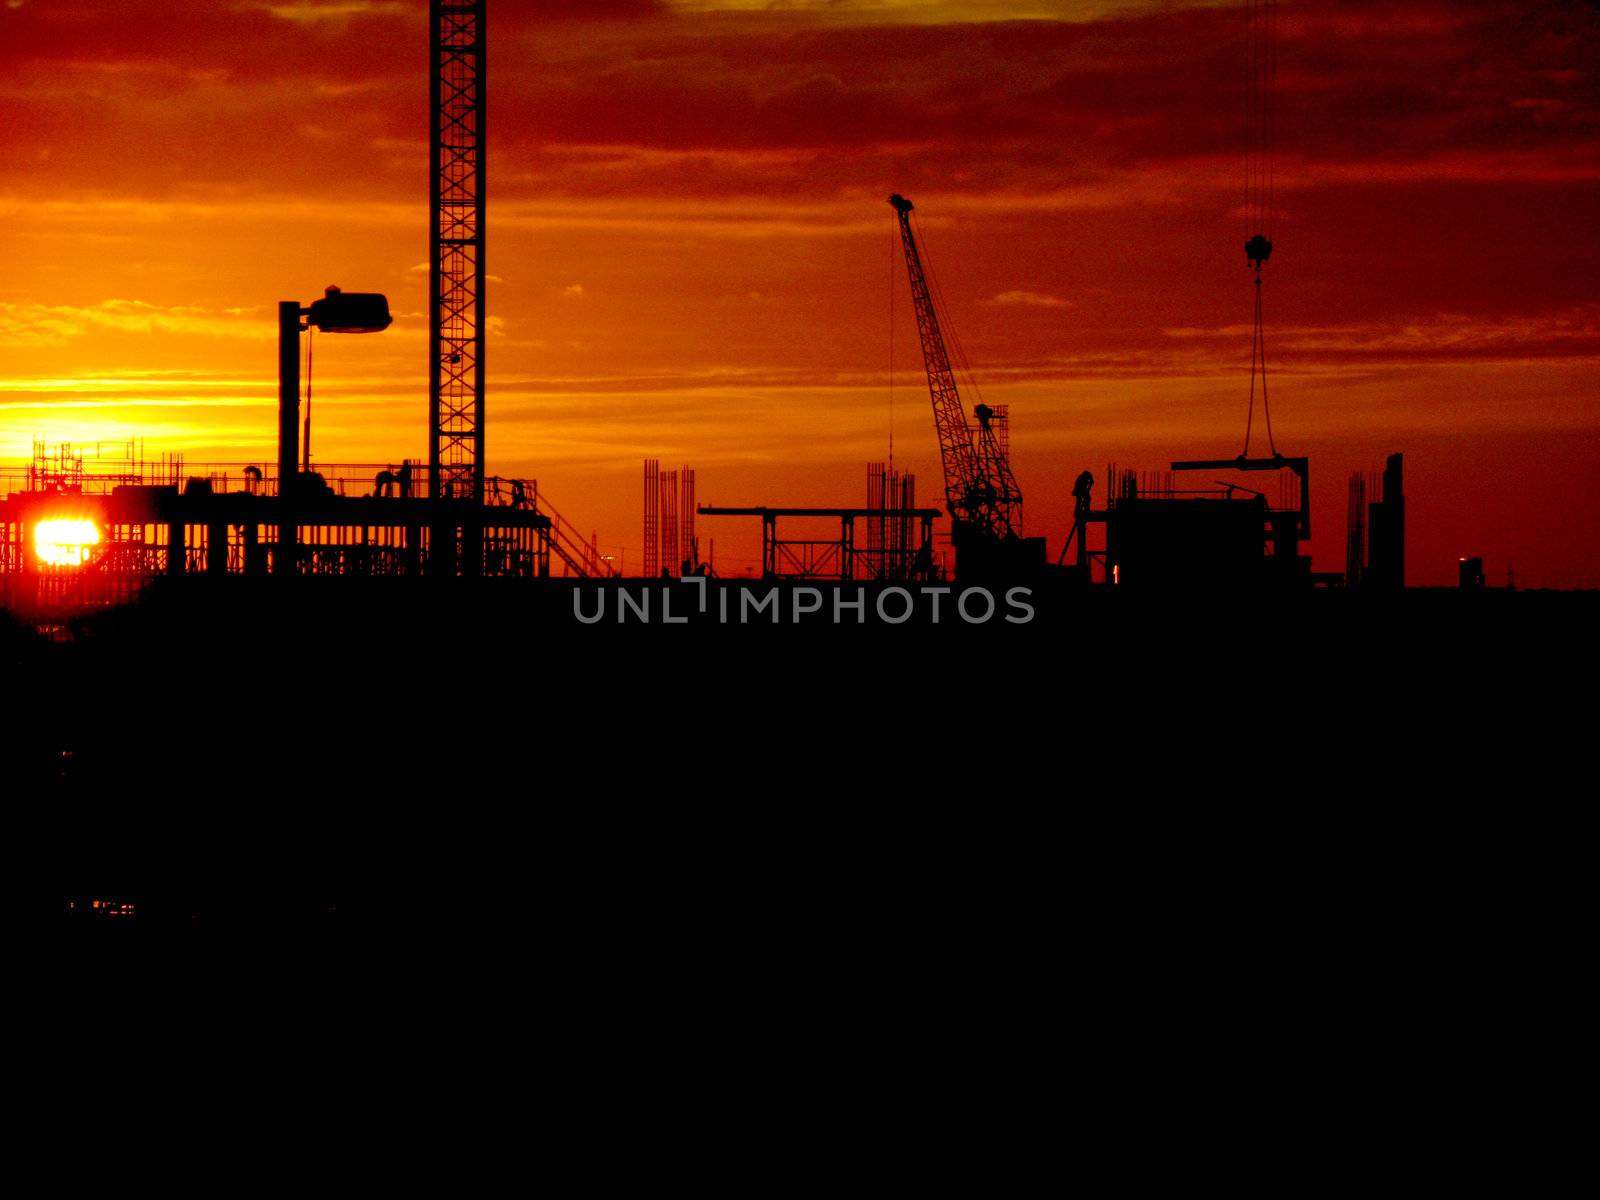 Sunhset Construction by tommroch